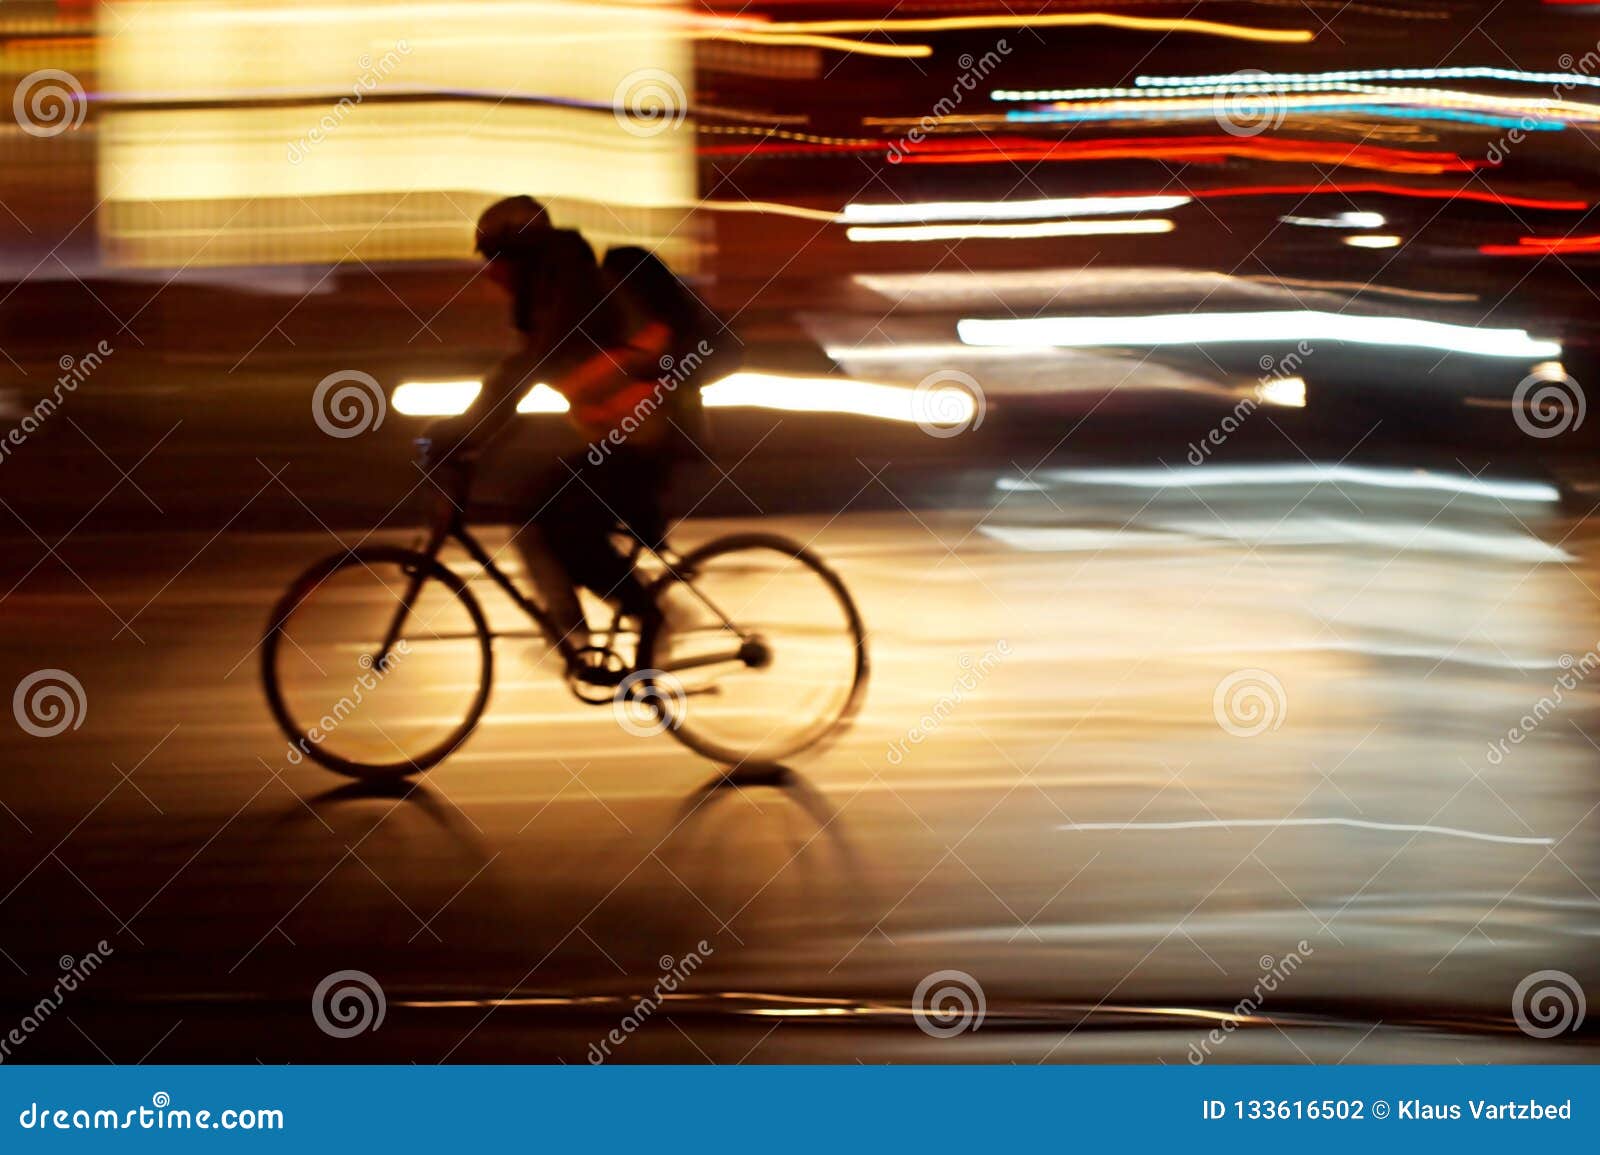 rushhour with cyclists and pedestrians at night